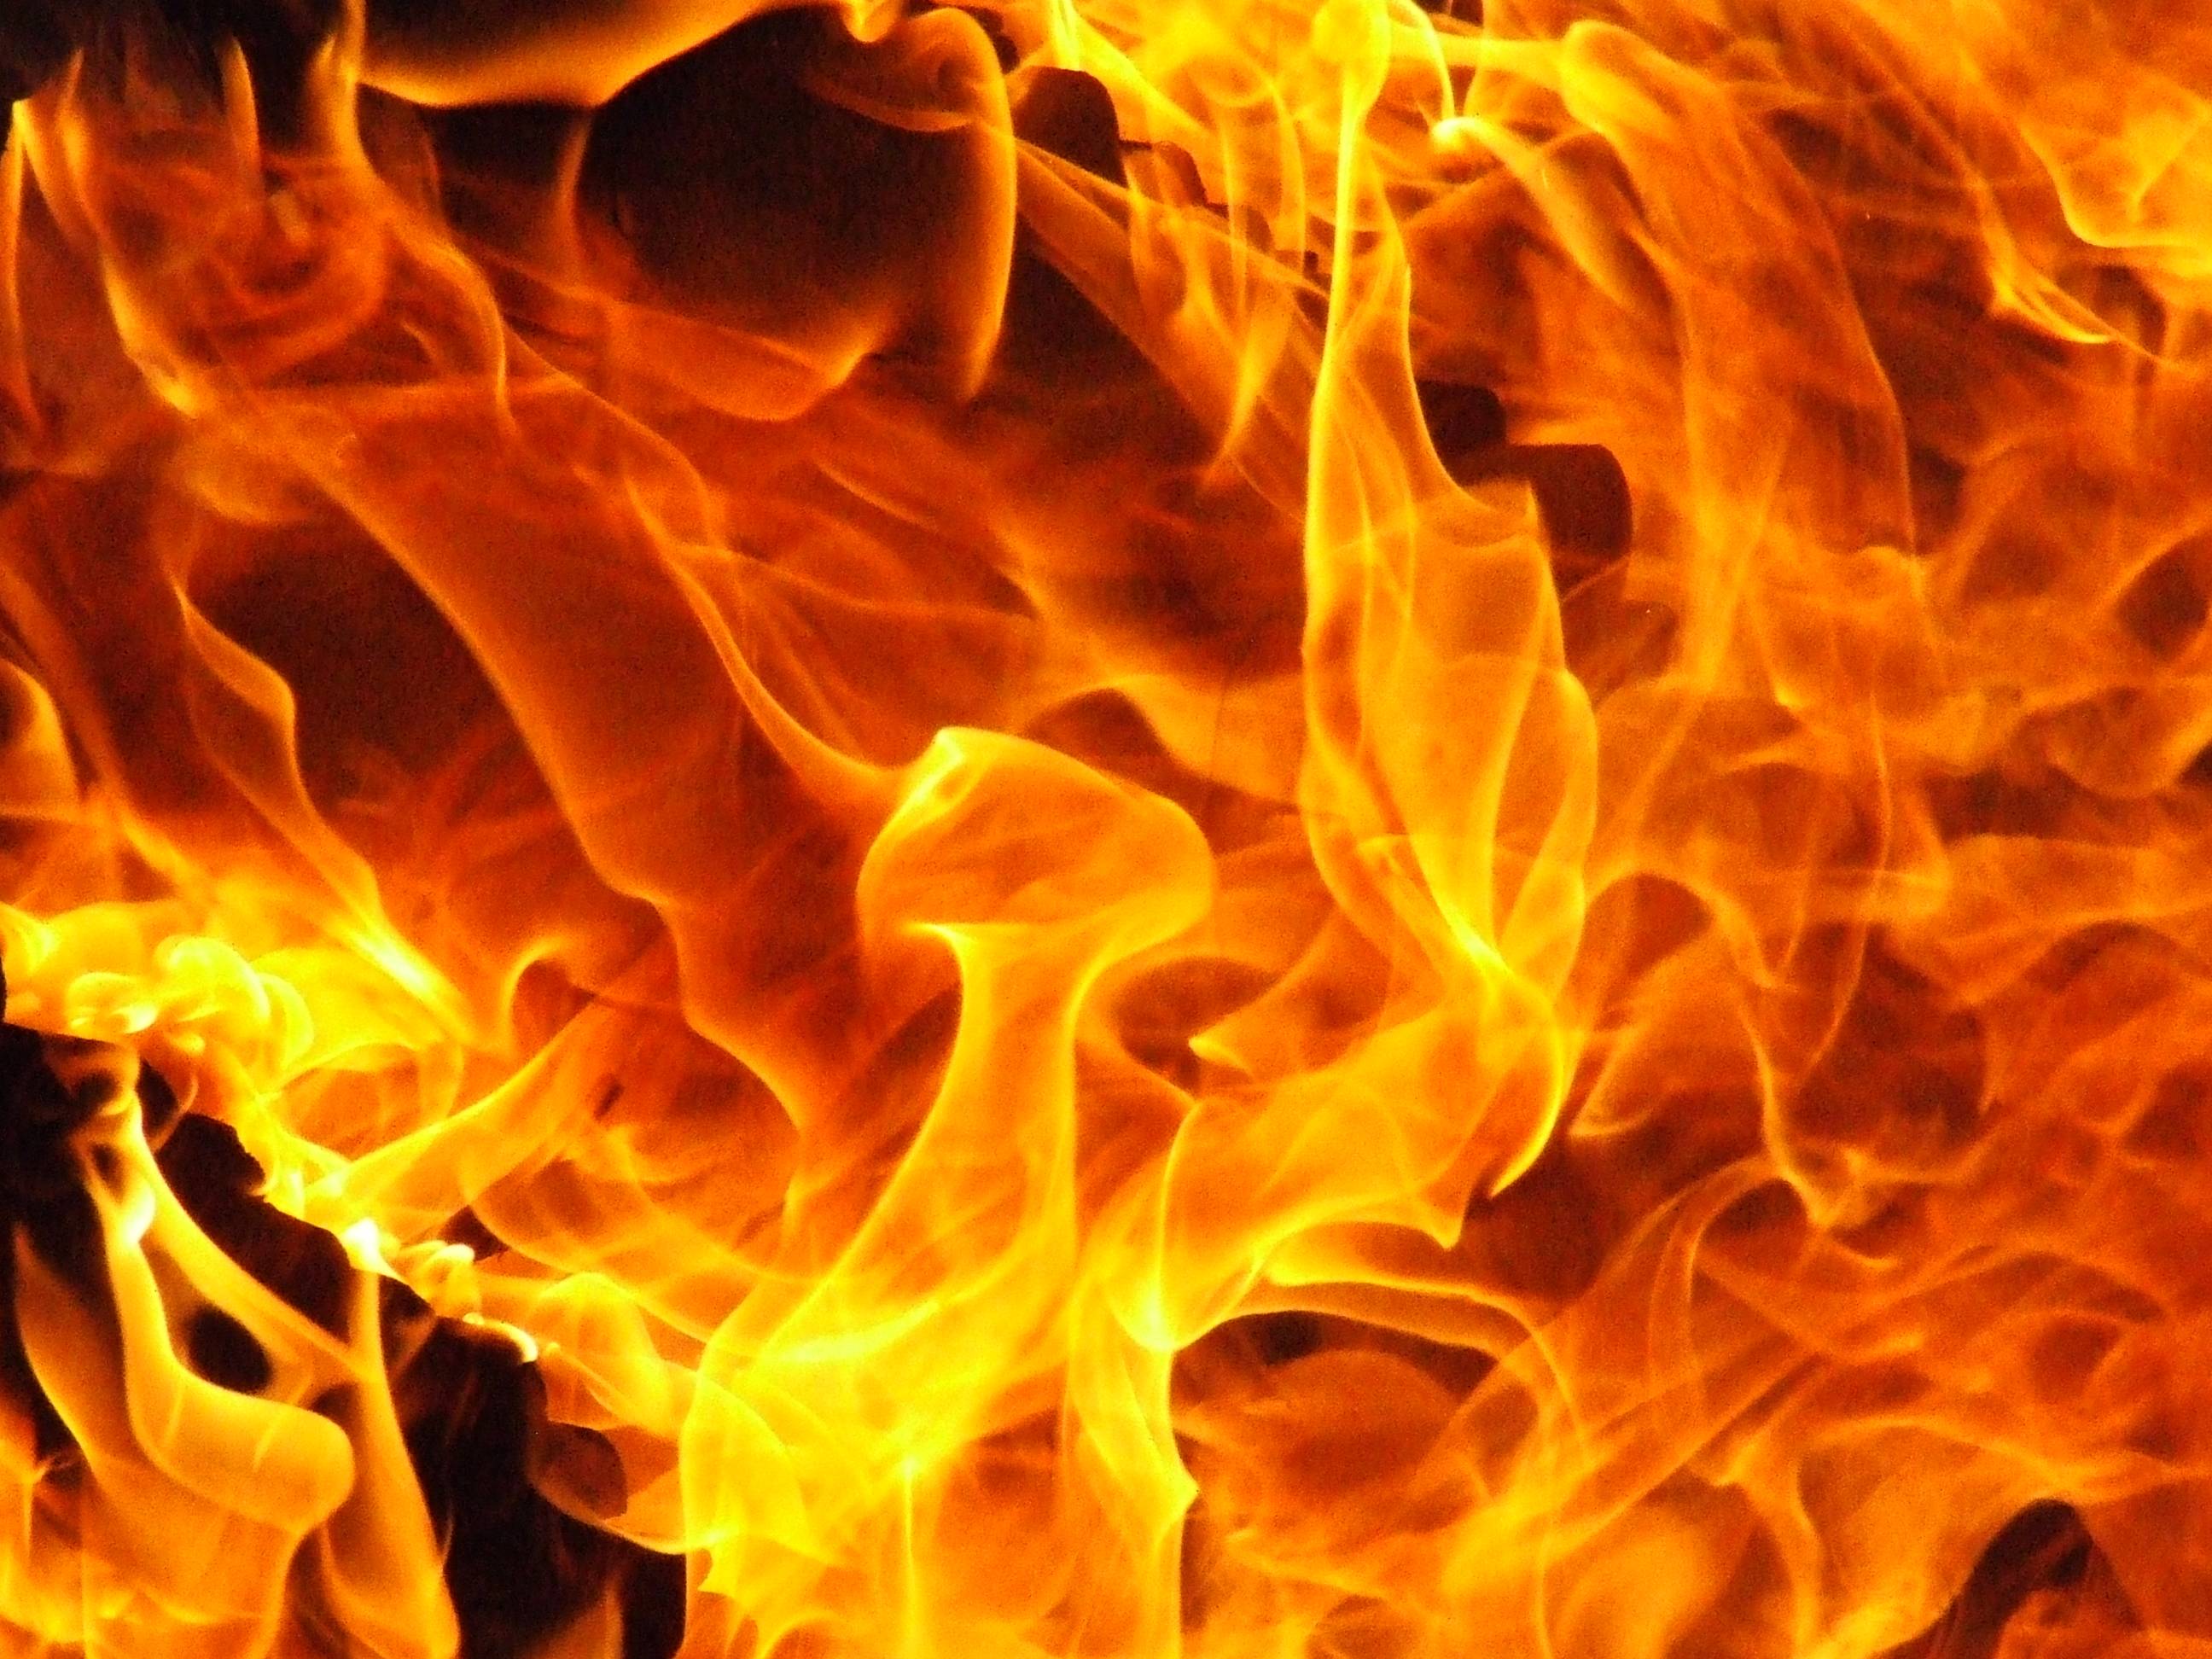 Disabled boy (6) burns to death in house fire | Kormorant